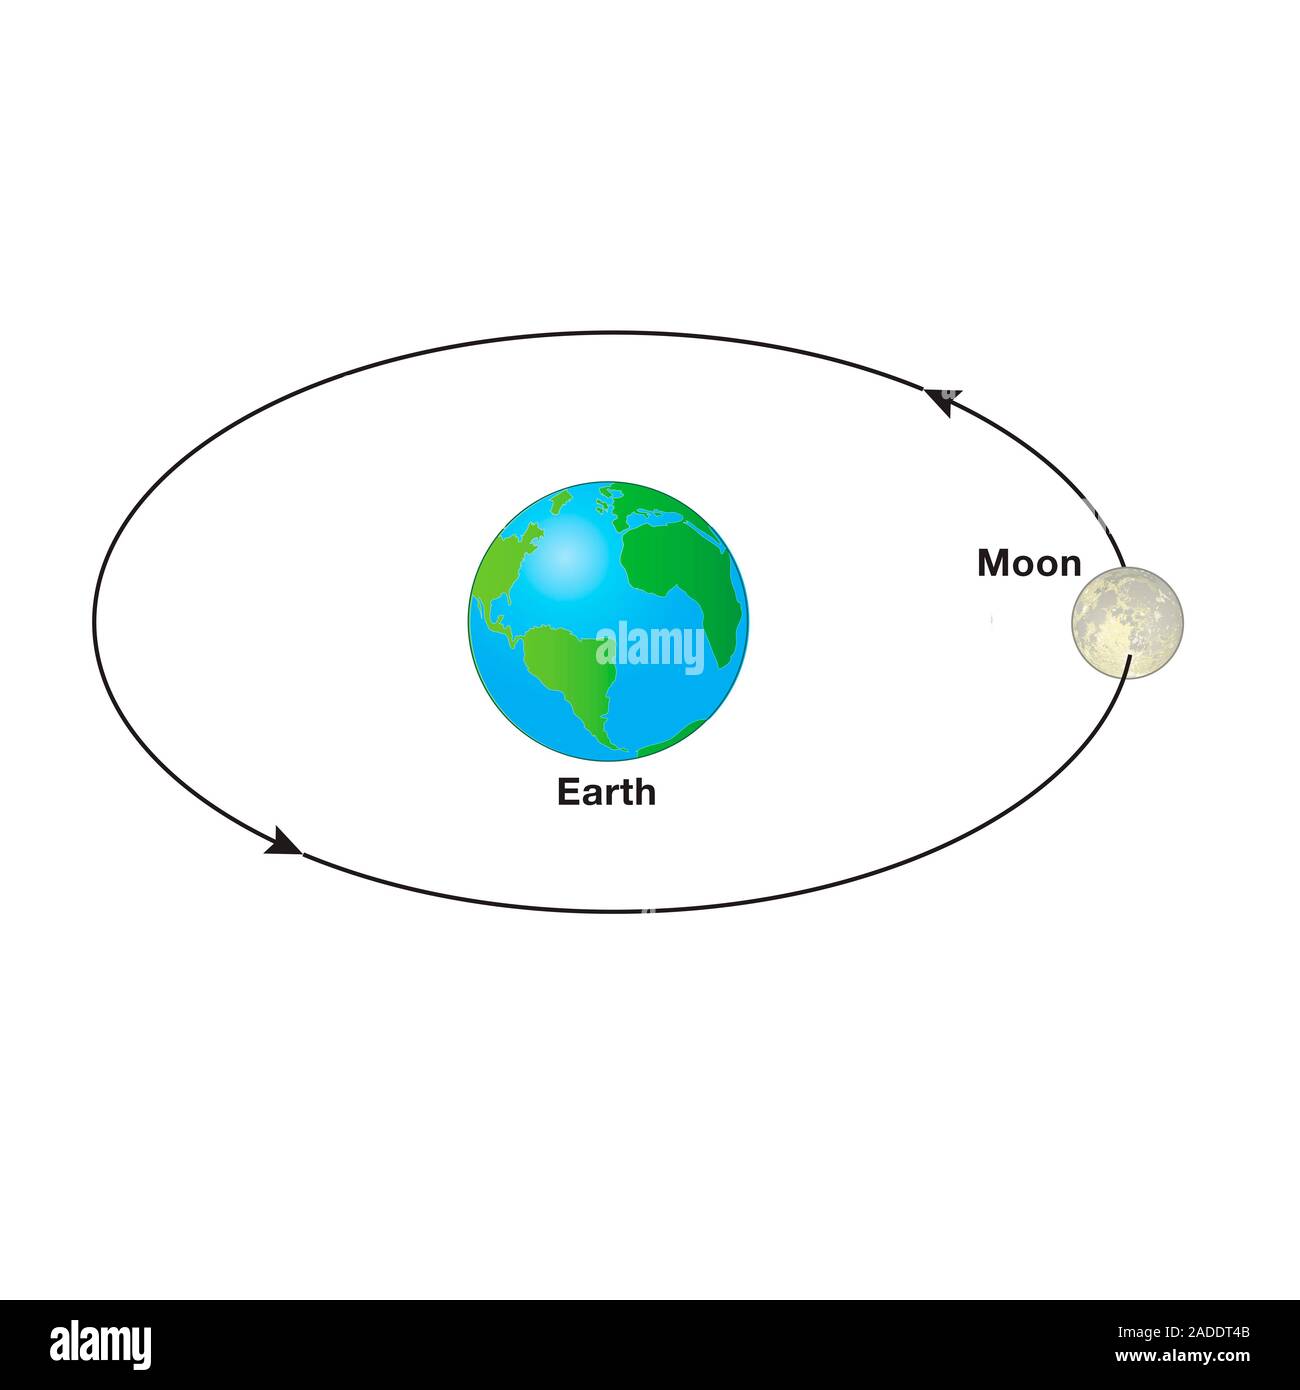 Orbit of the Moon around the Earth, illustration. The Moon orbits the Earth at a distance of about 384,400 kilometres, taking just over 27 days to com Stock Photo